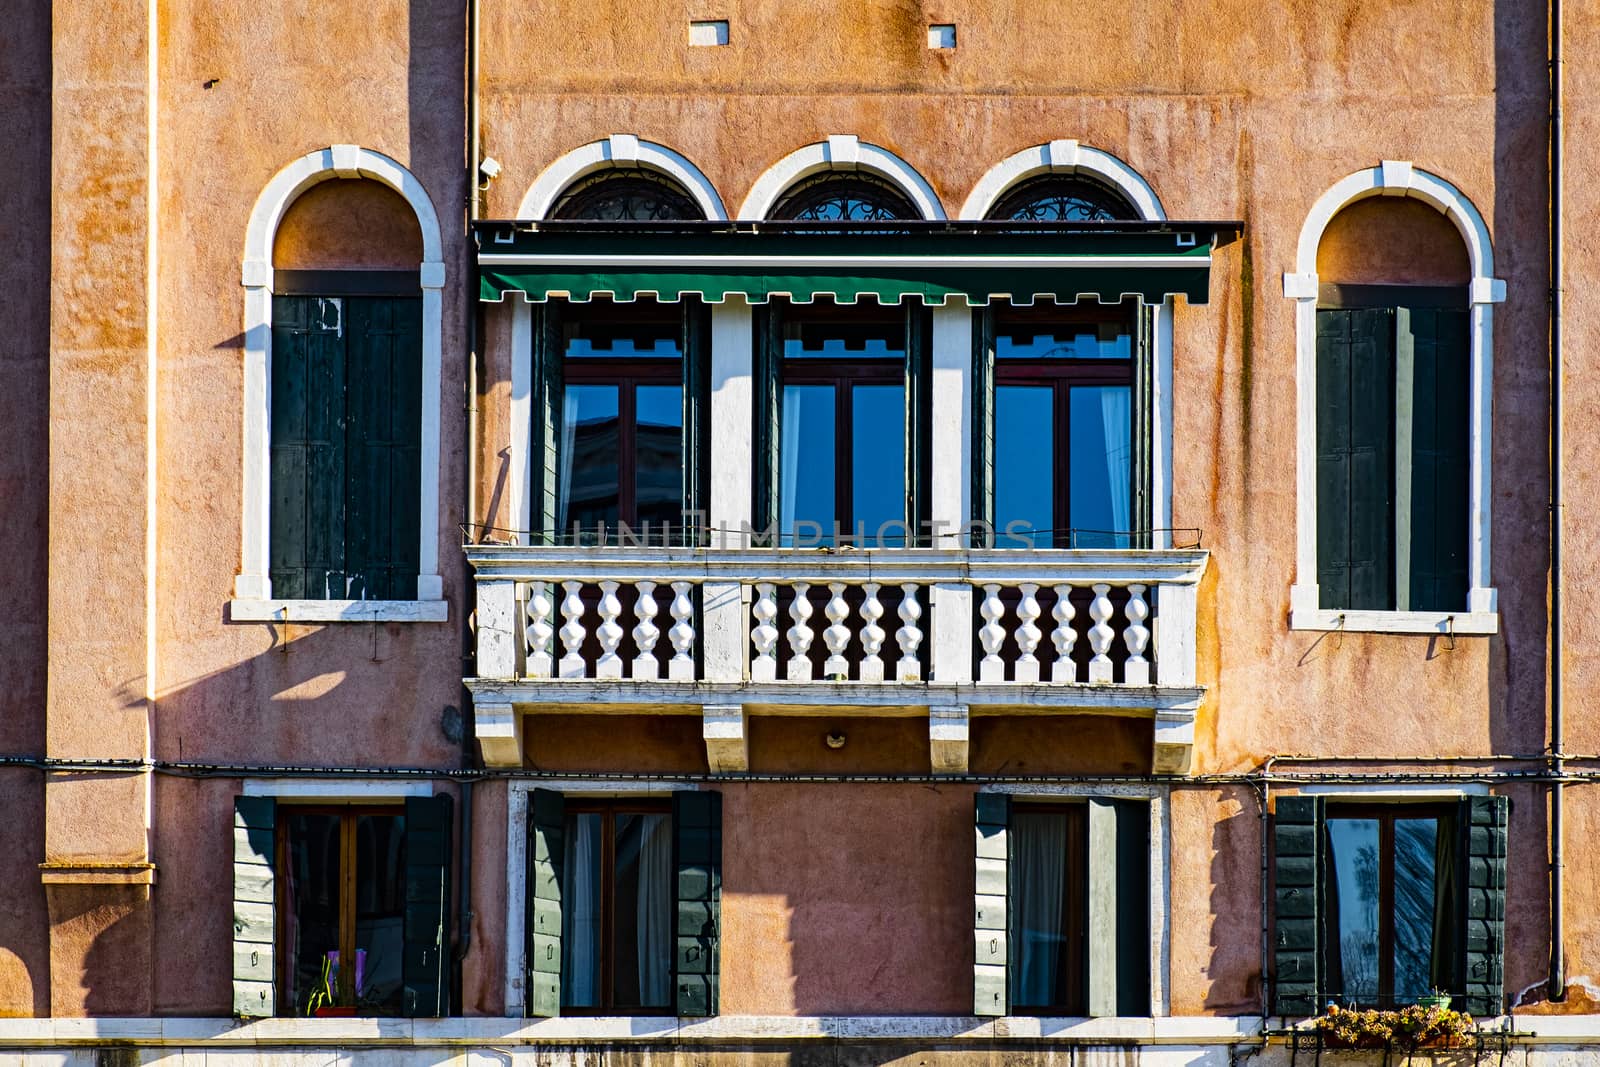 Italian culture on Venetian facades. Venice is rich and poor, well-groomed and abandoned, reflected in its windows.